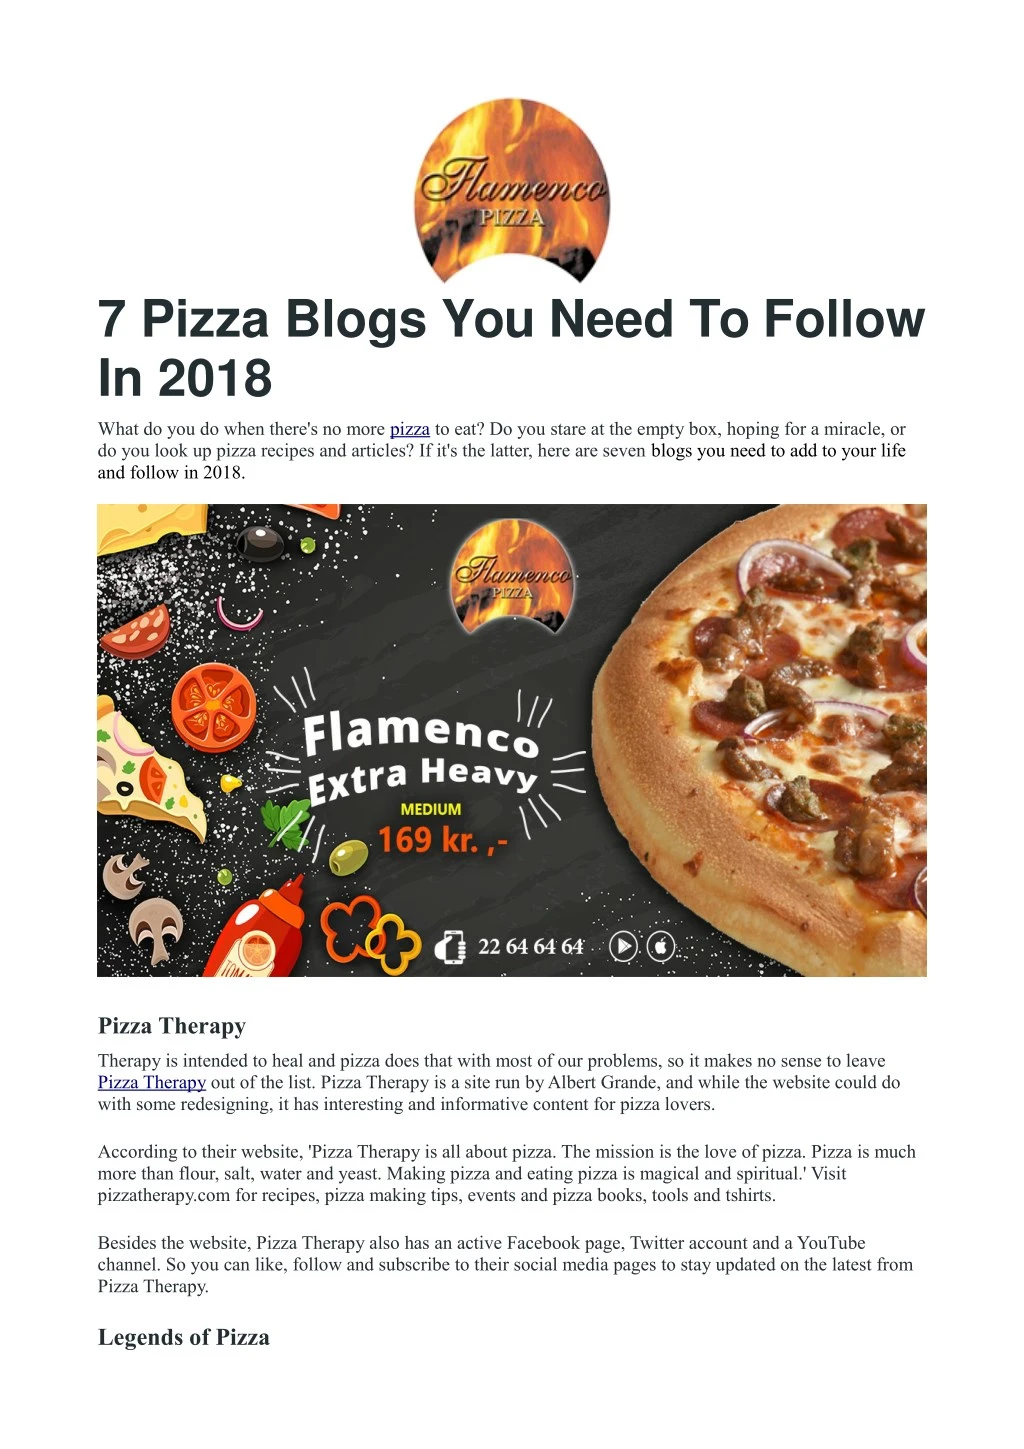 7 pizza blogs you need to follow in 2018